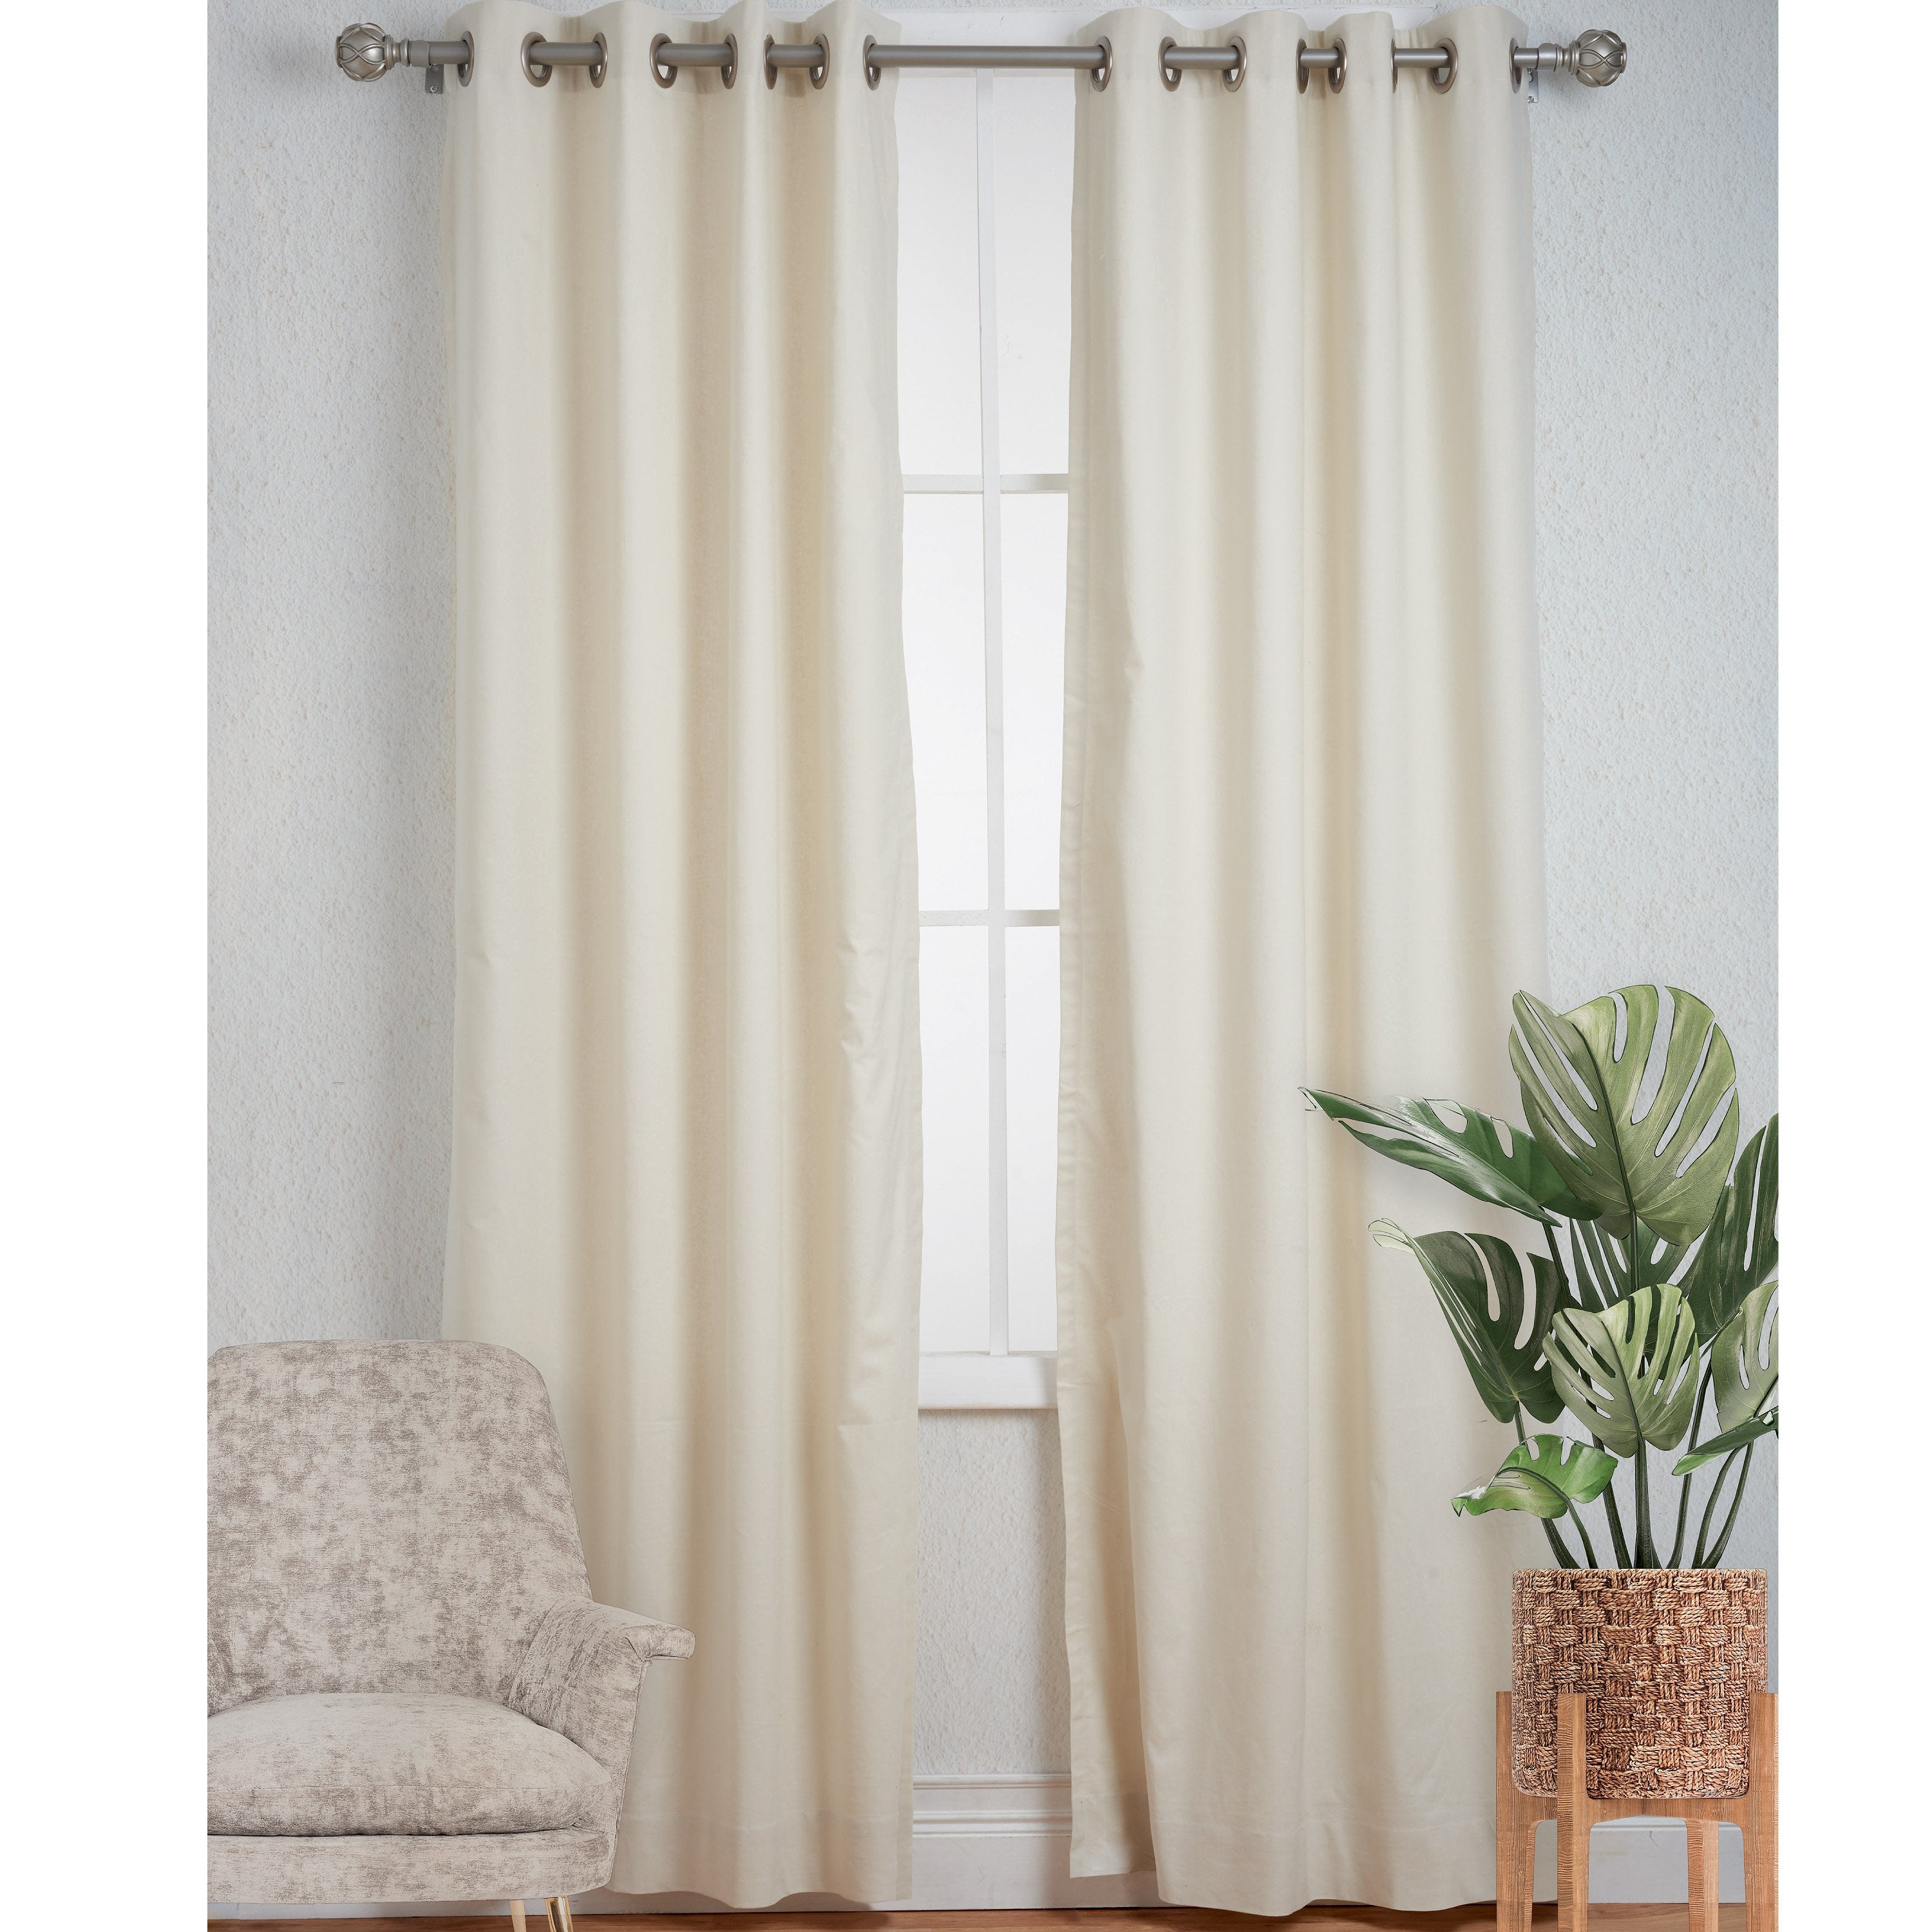 Simplicity Sewing Pattern 9356 Curtains from Jaycotts Sewing Supplies